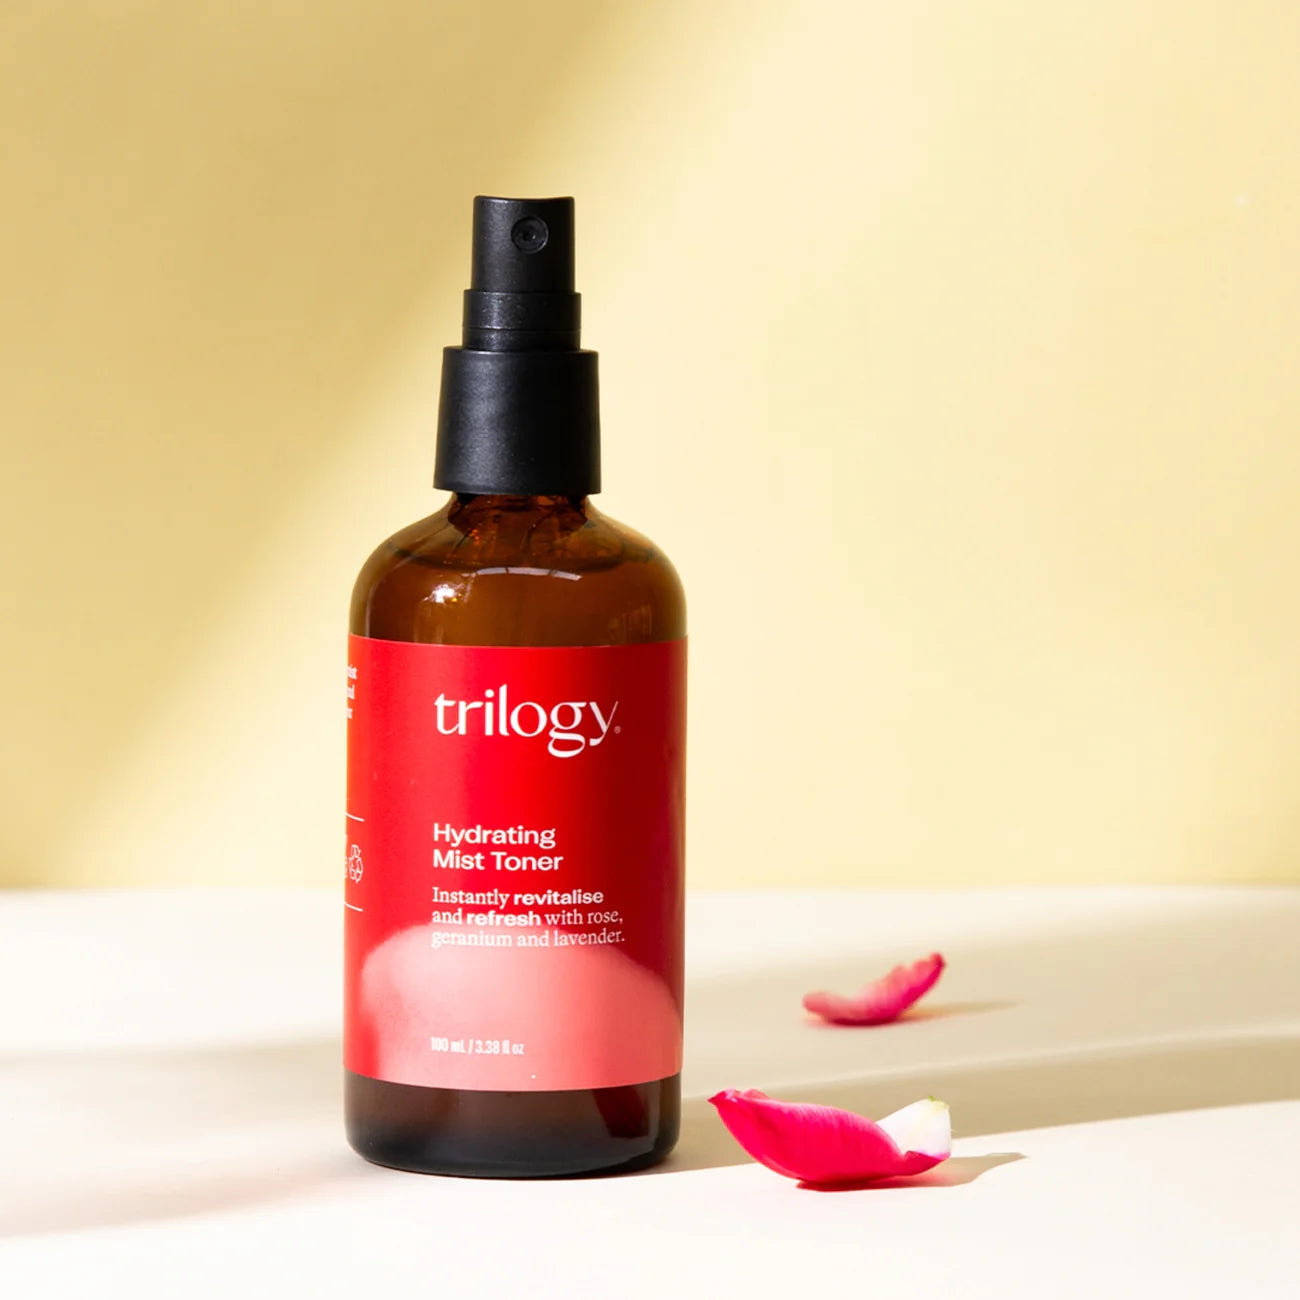 Trilogy Hydrating Mist Toner 100ml with Rose, Lavender for Dewy, Cool & Hydrated Skin (All Skin Types)